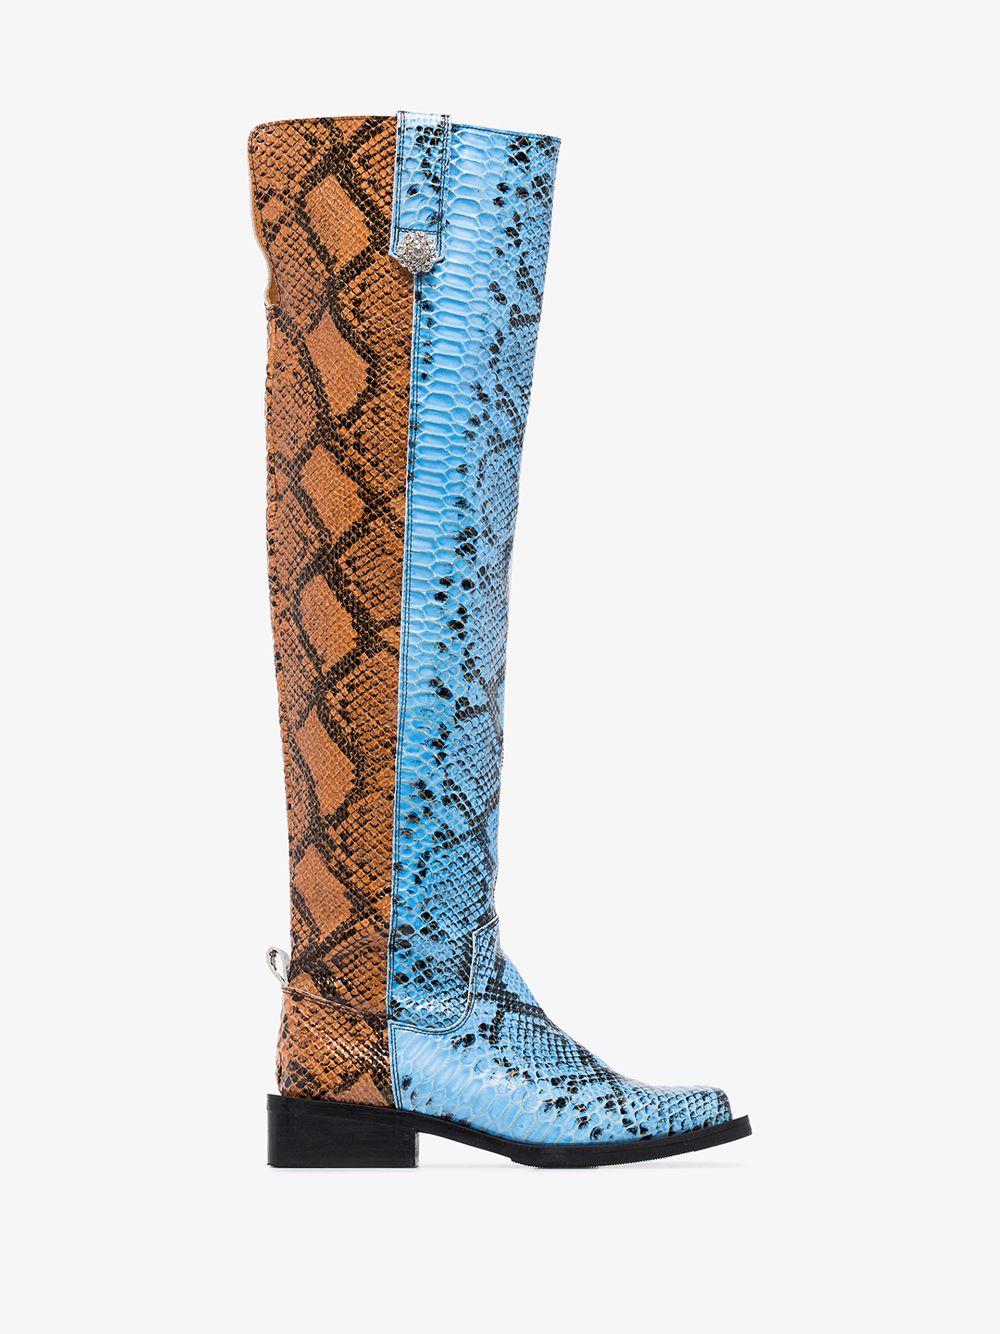 GANNI BLUE AND BROWN 40 SNAKE PRINT KNEE-HIGH BOOTS,S120614614257